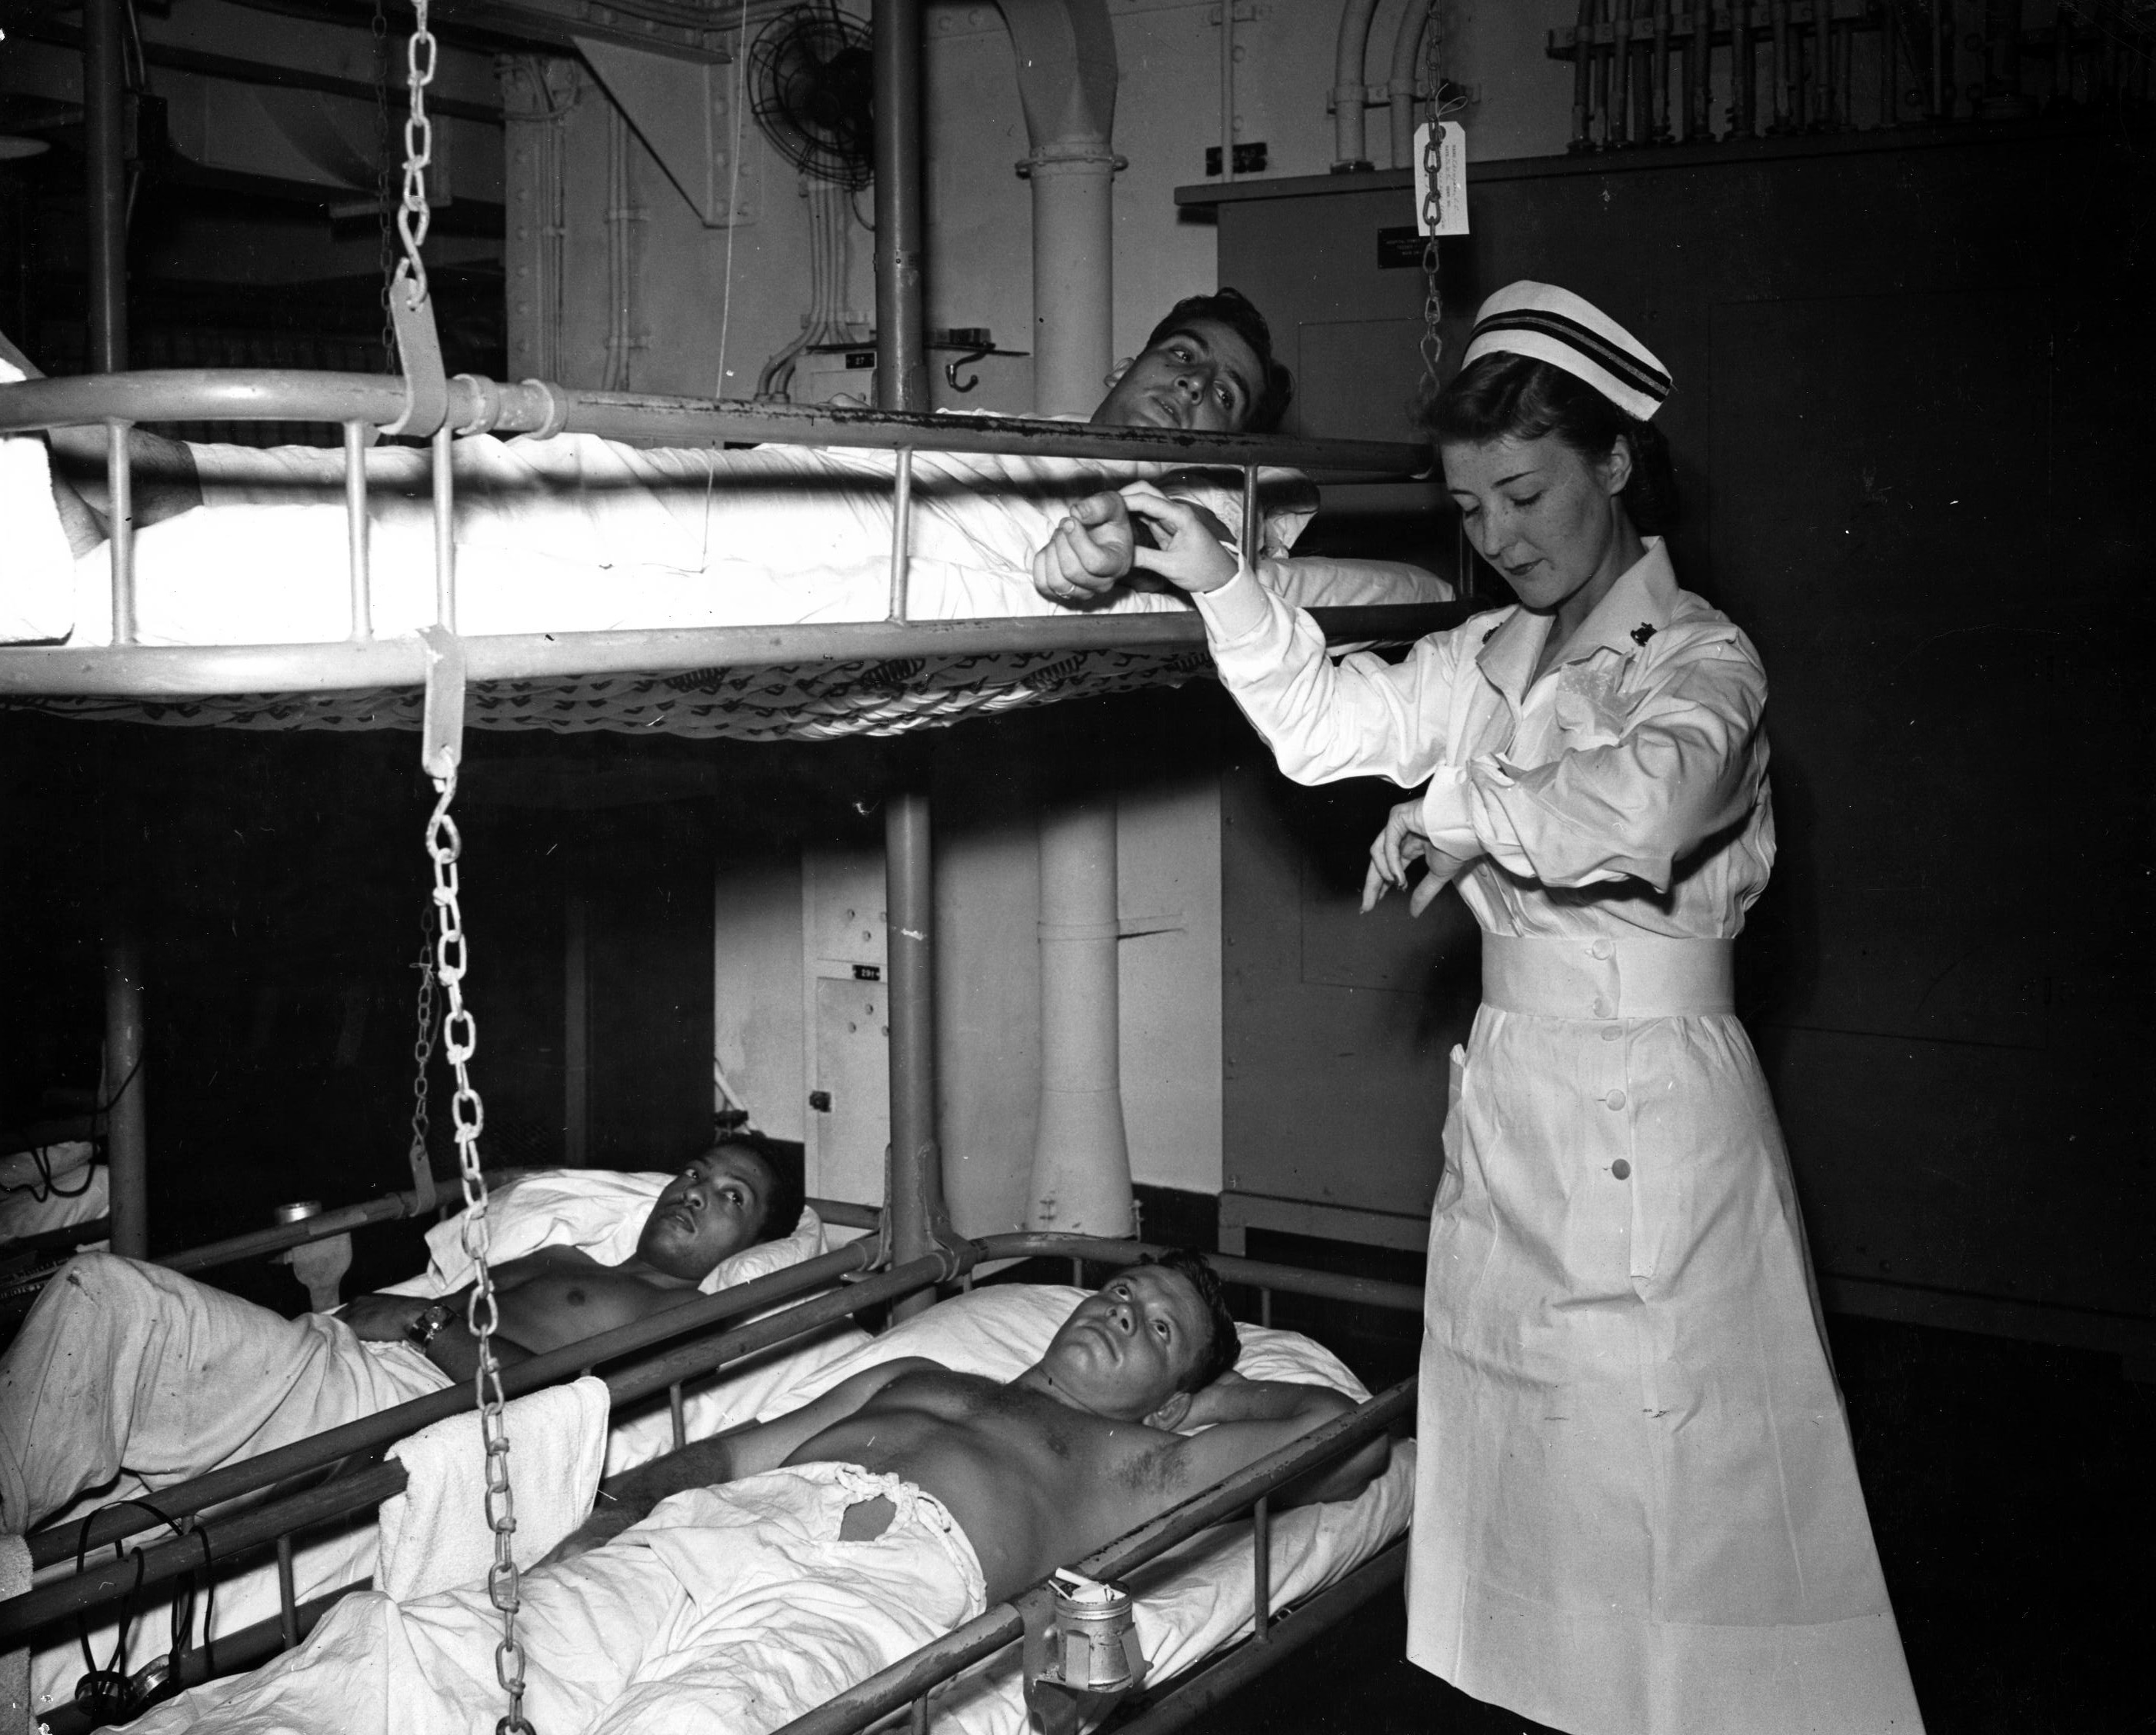 Nurse Takes Pulse of Patient on Hospital Ship